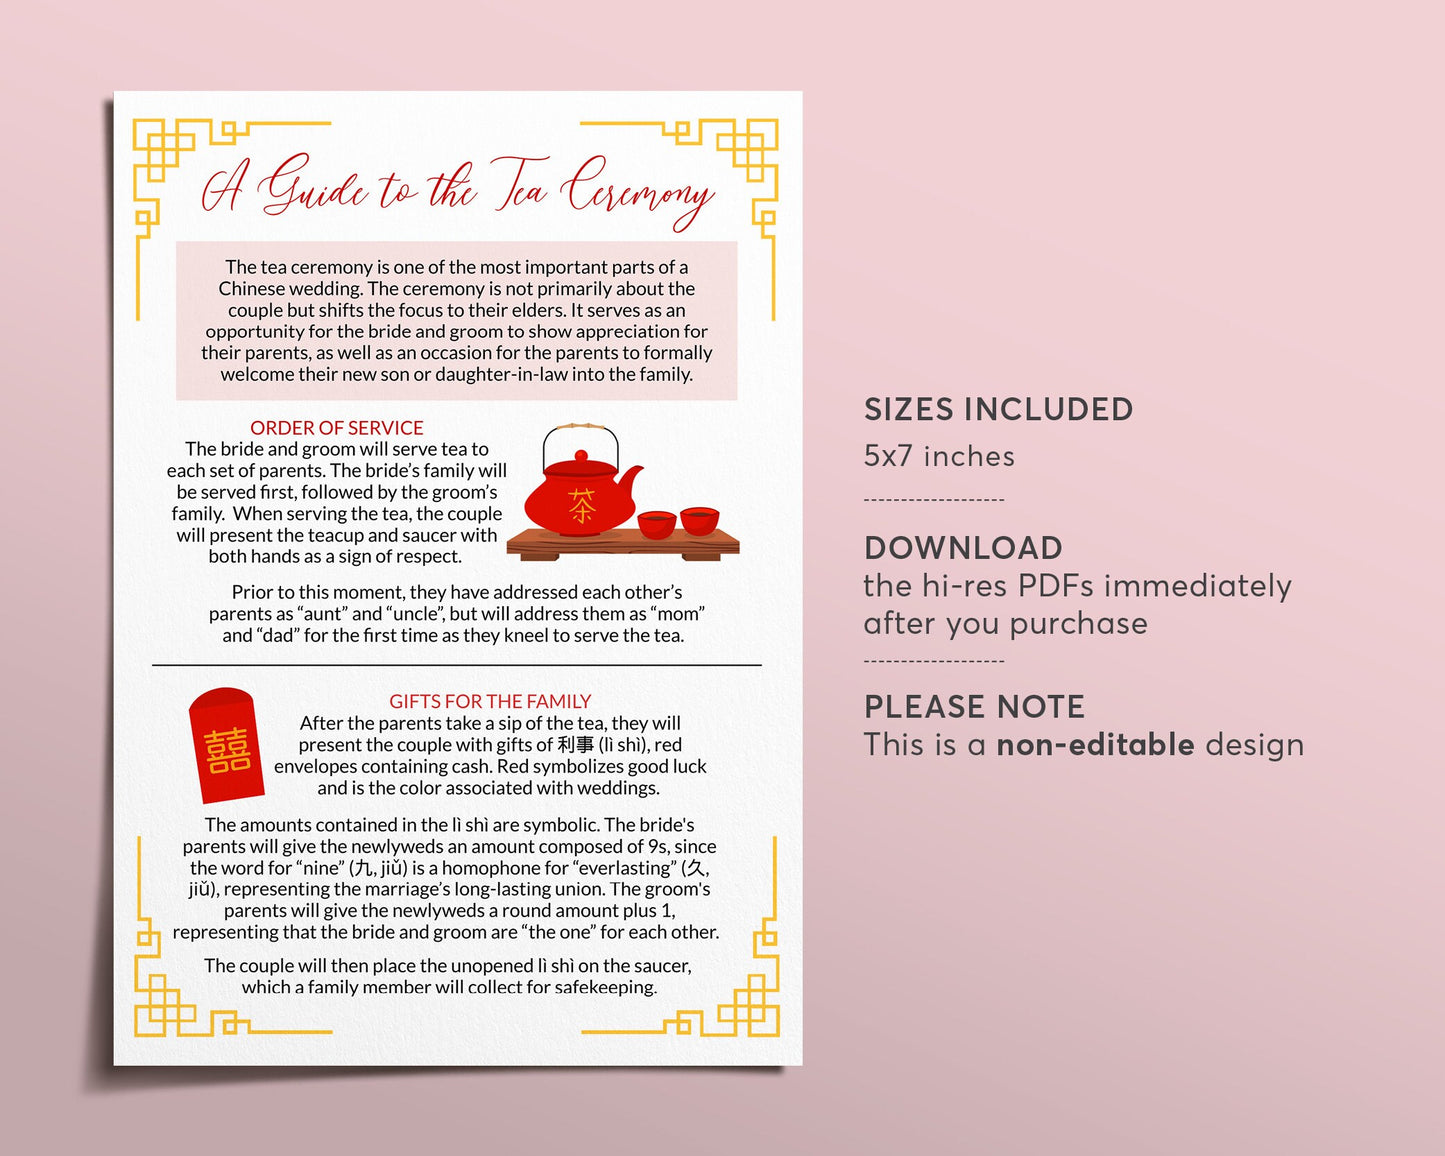 Guide to Chinese Tea Ceremony, Asian Theme Wedding Reception, Guide to Tea Ceremony, Vietnamese Wedding